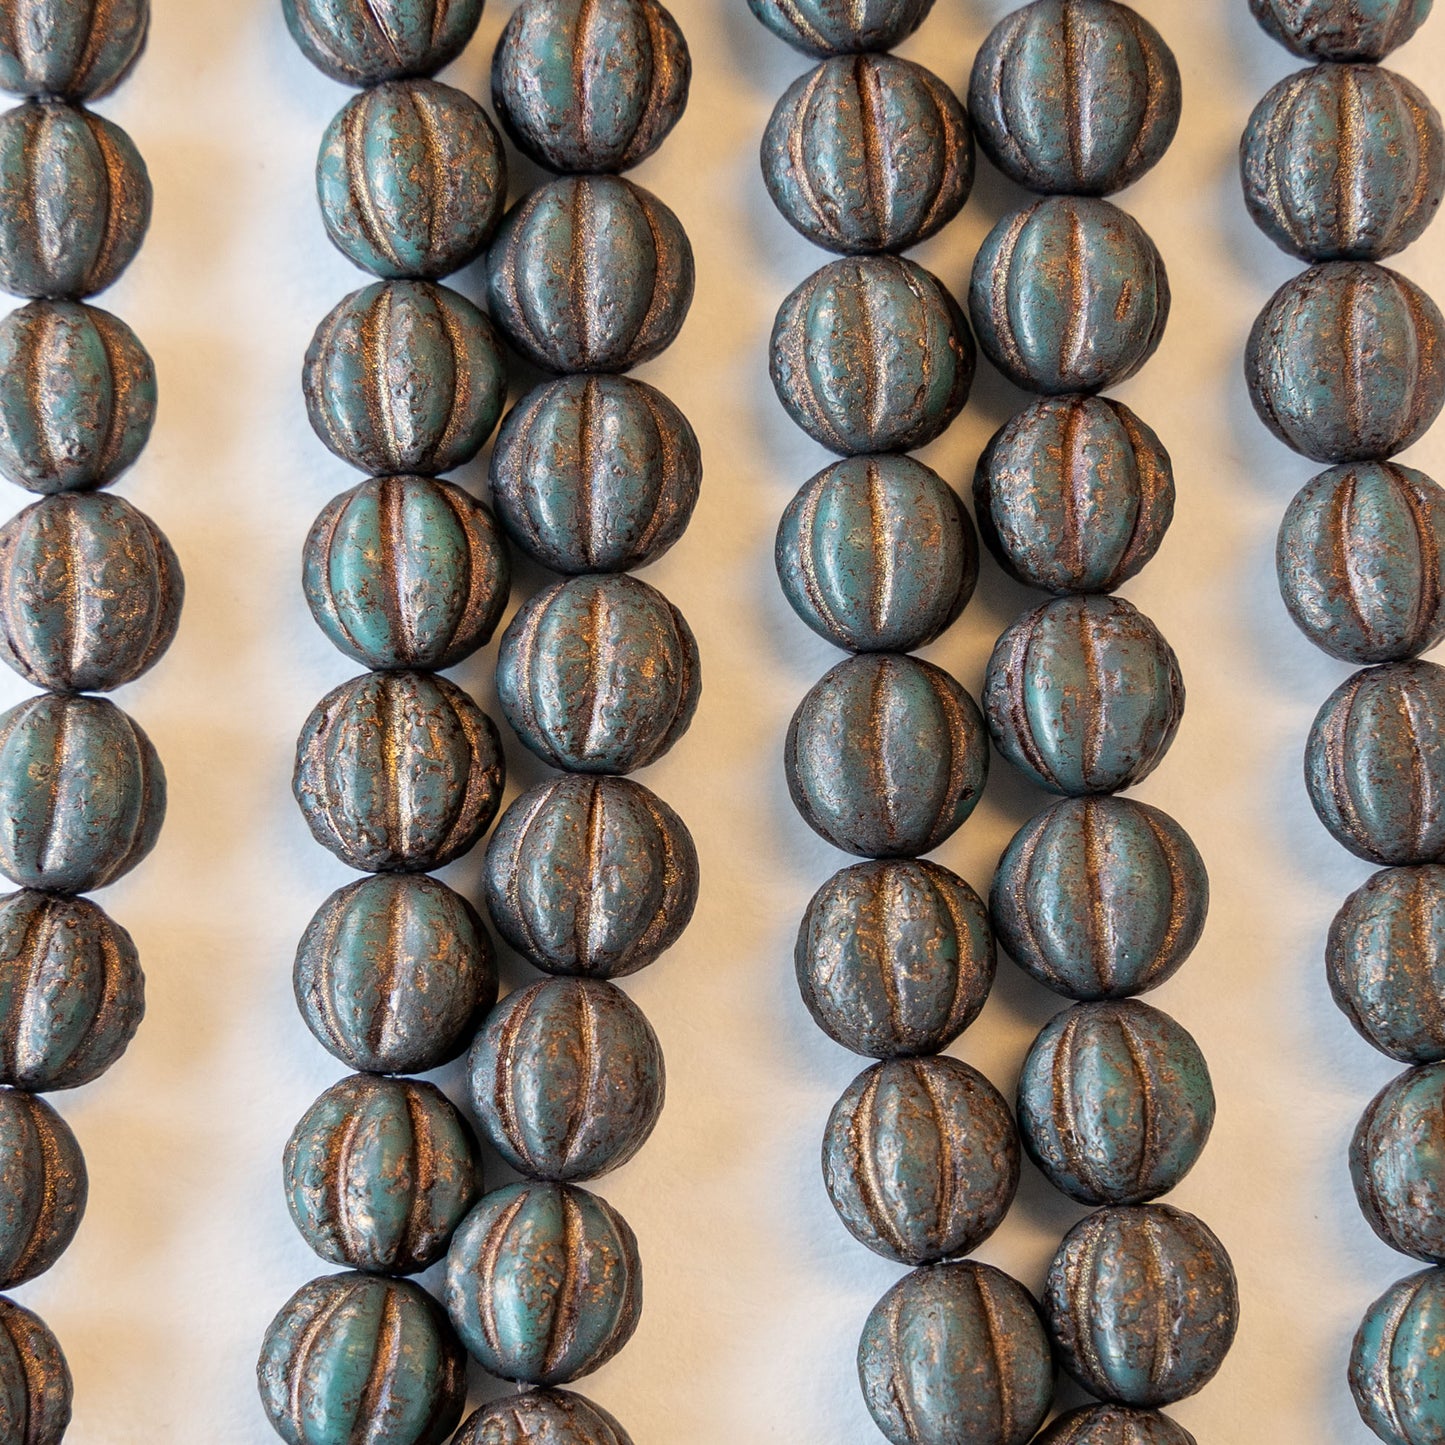 8mm Melon Beads - Dark Turquoise with Bronze Wash - 30 Beads